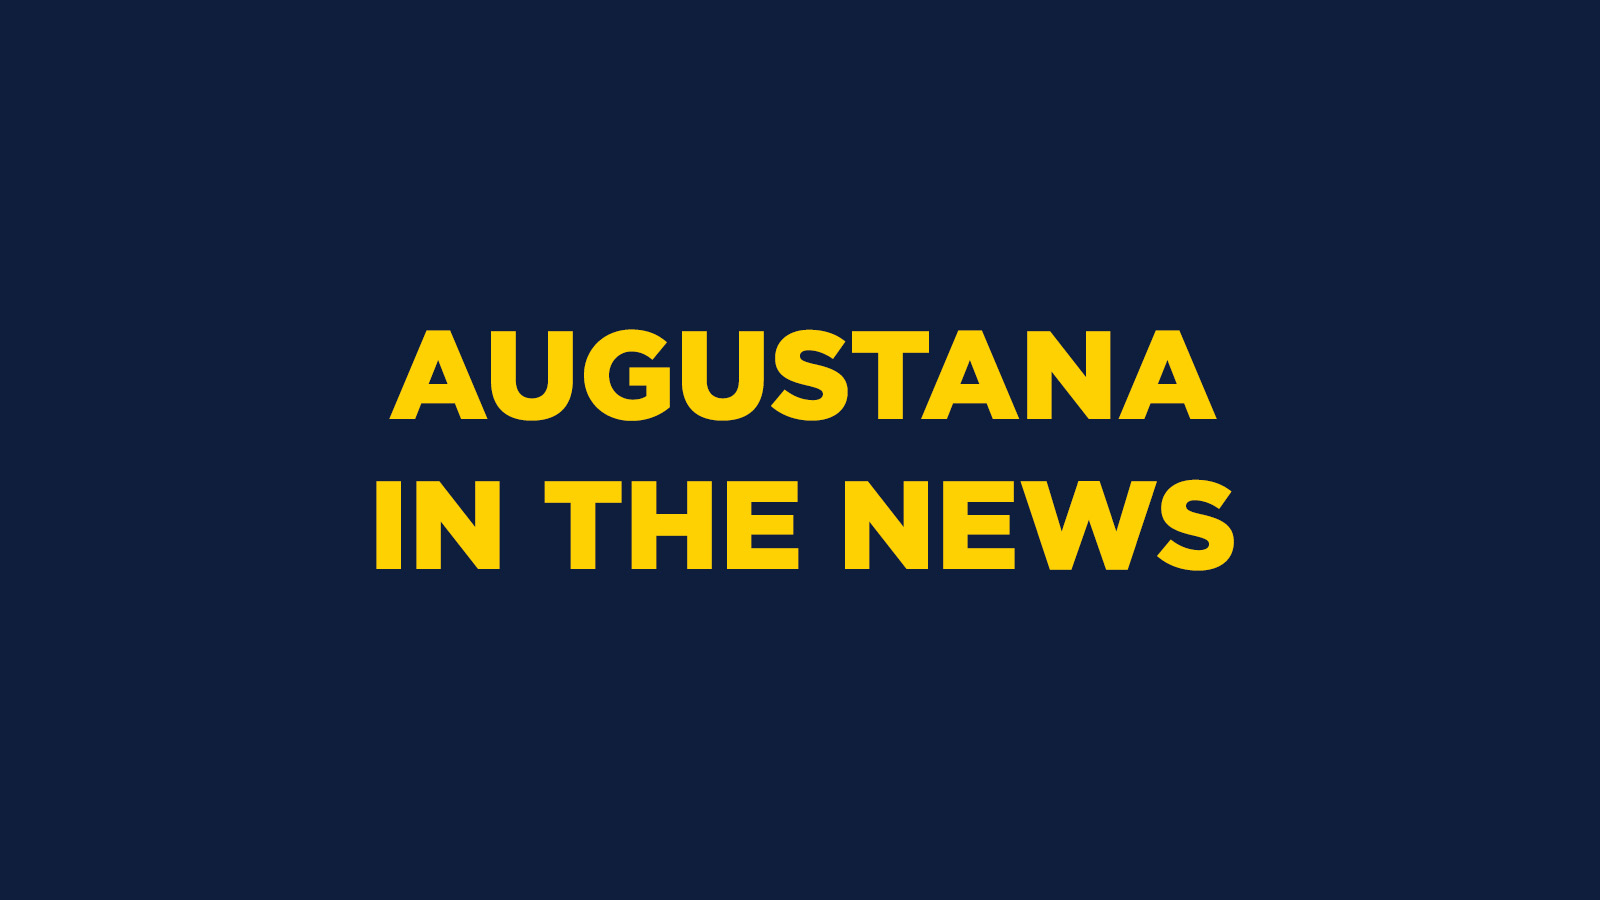 AUGUSTANA IN THE NEWS